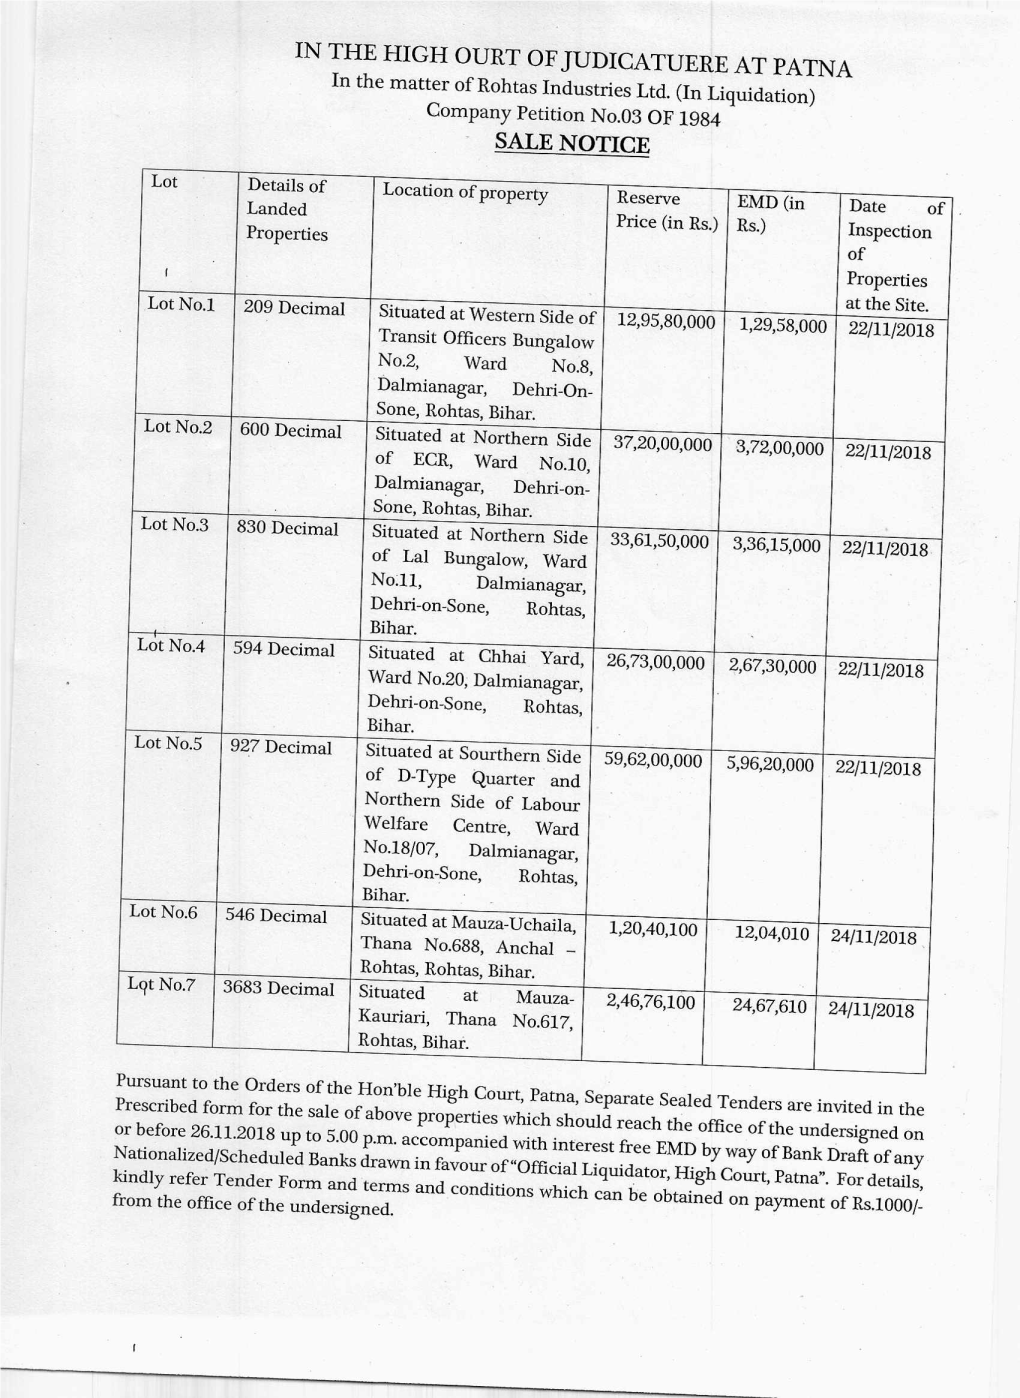 Sale Notice in the Matter of Rohtas Industries Ltd